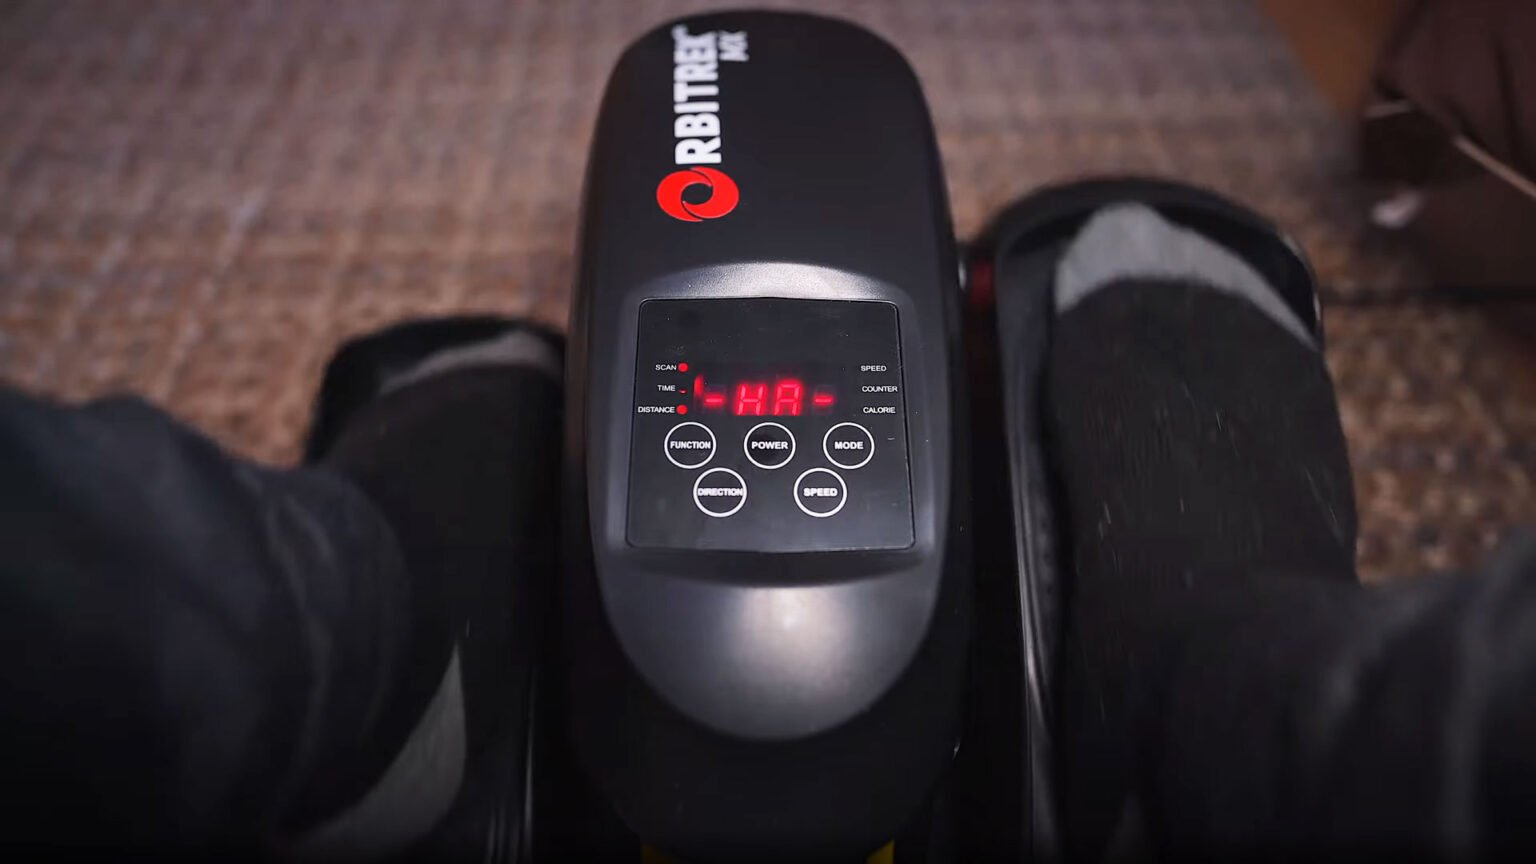 Orbitrek MX Motorised Seated Elliptical Trainer Review: Can you really